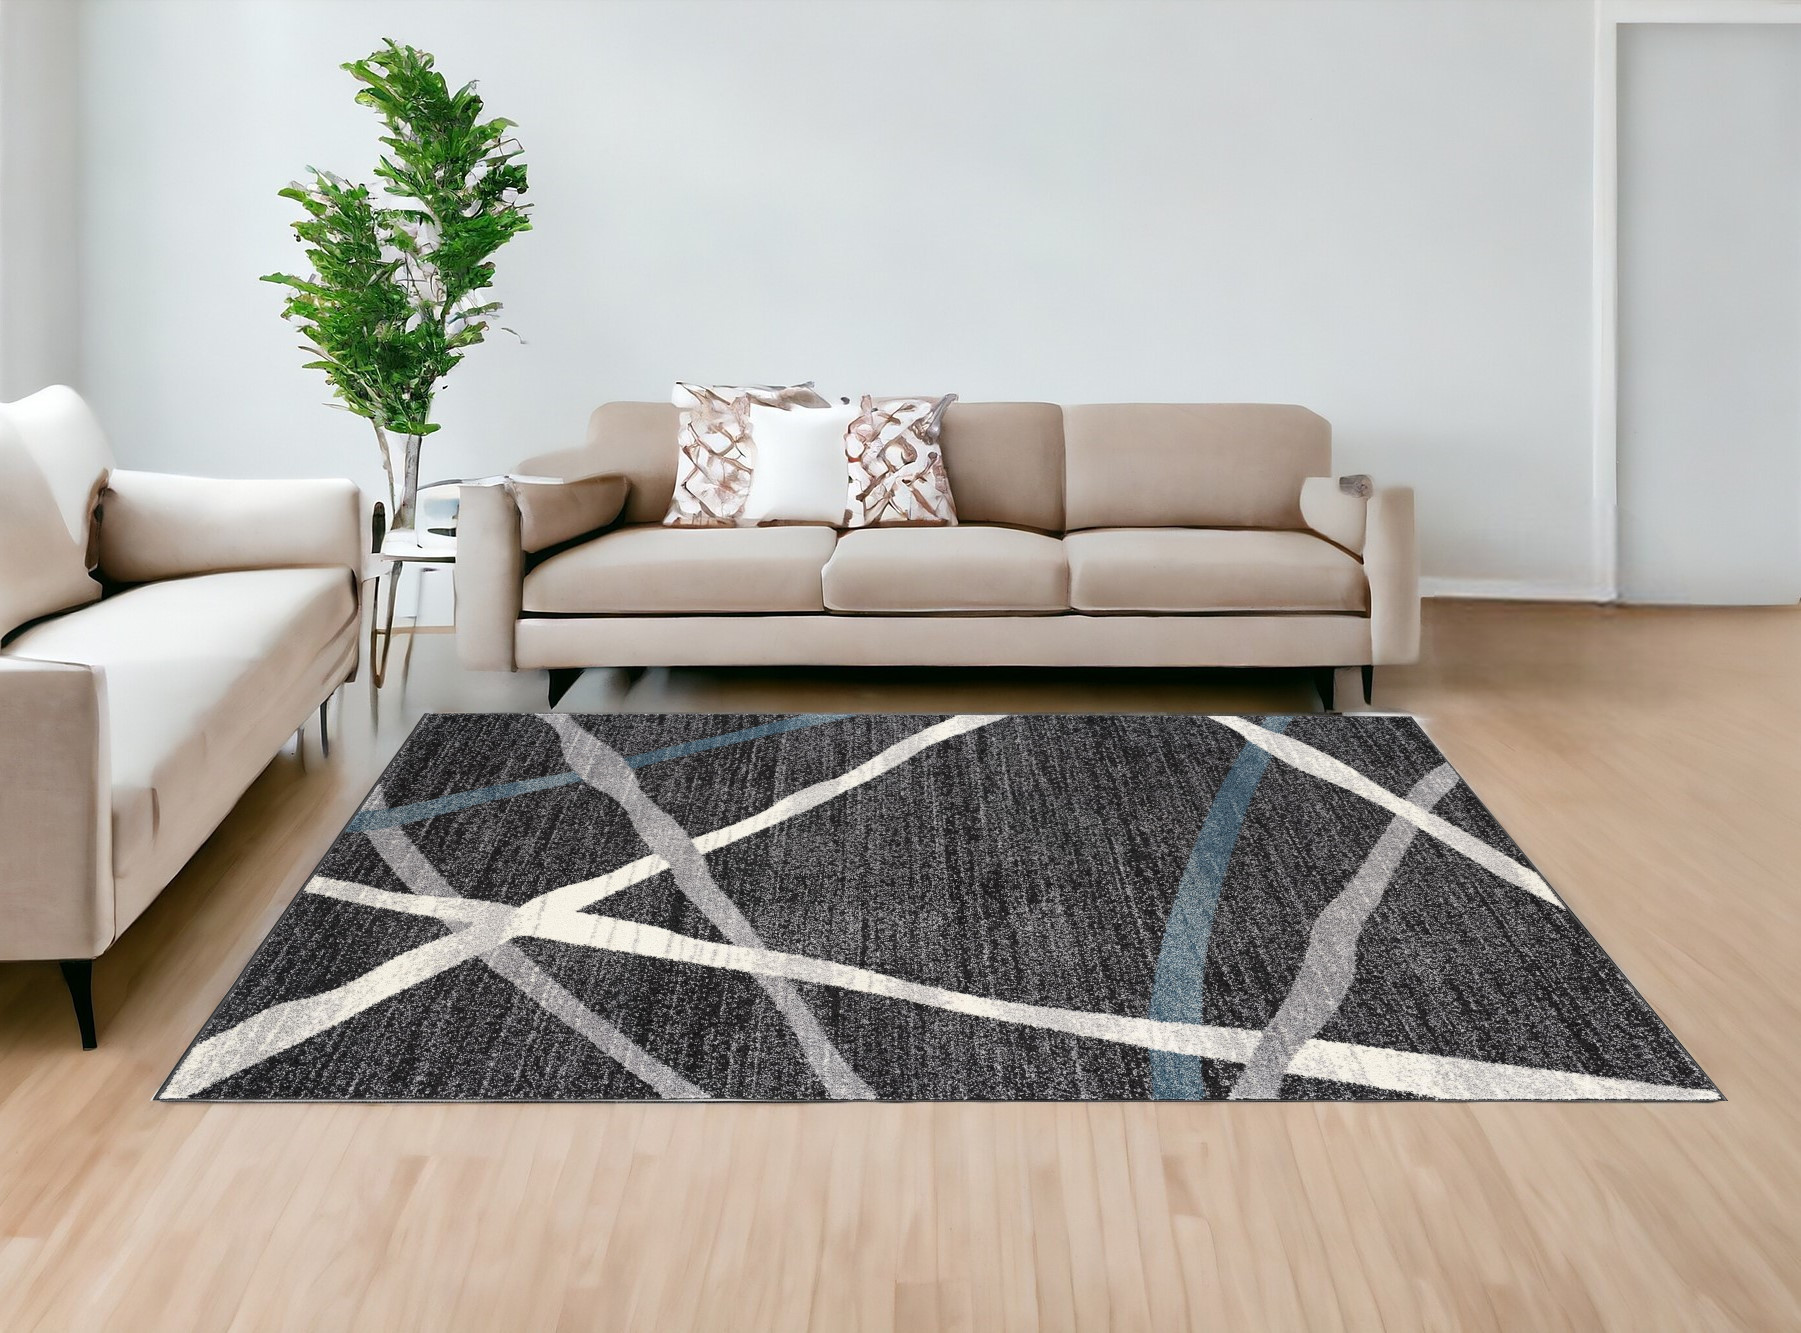 8’ X 11’ Distressed Black And Gray Abstract Area Rug-390312-1